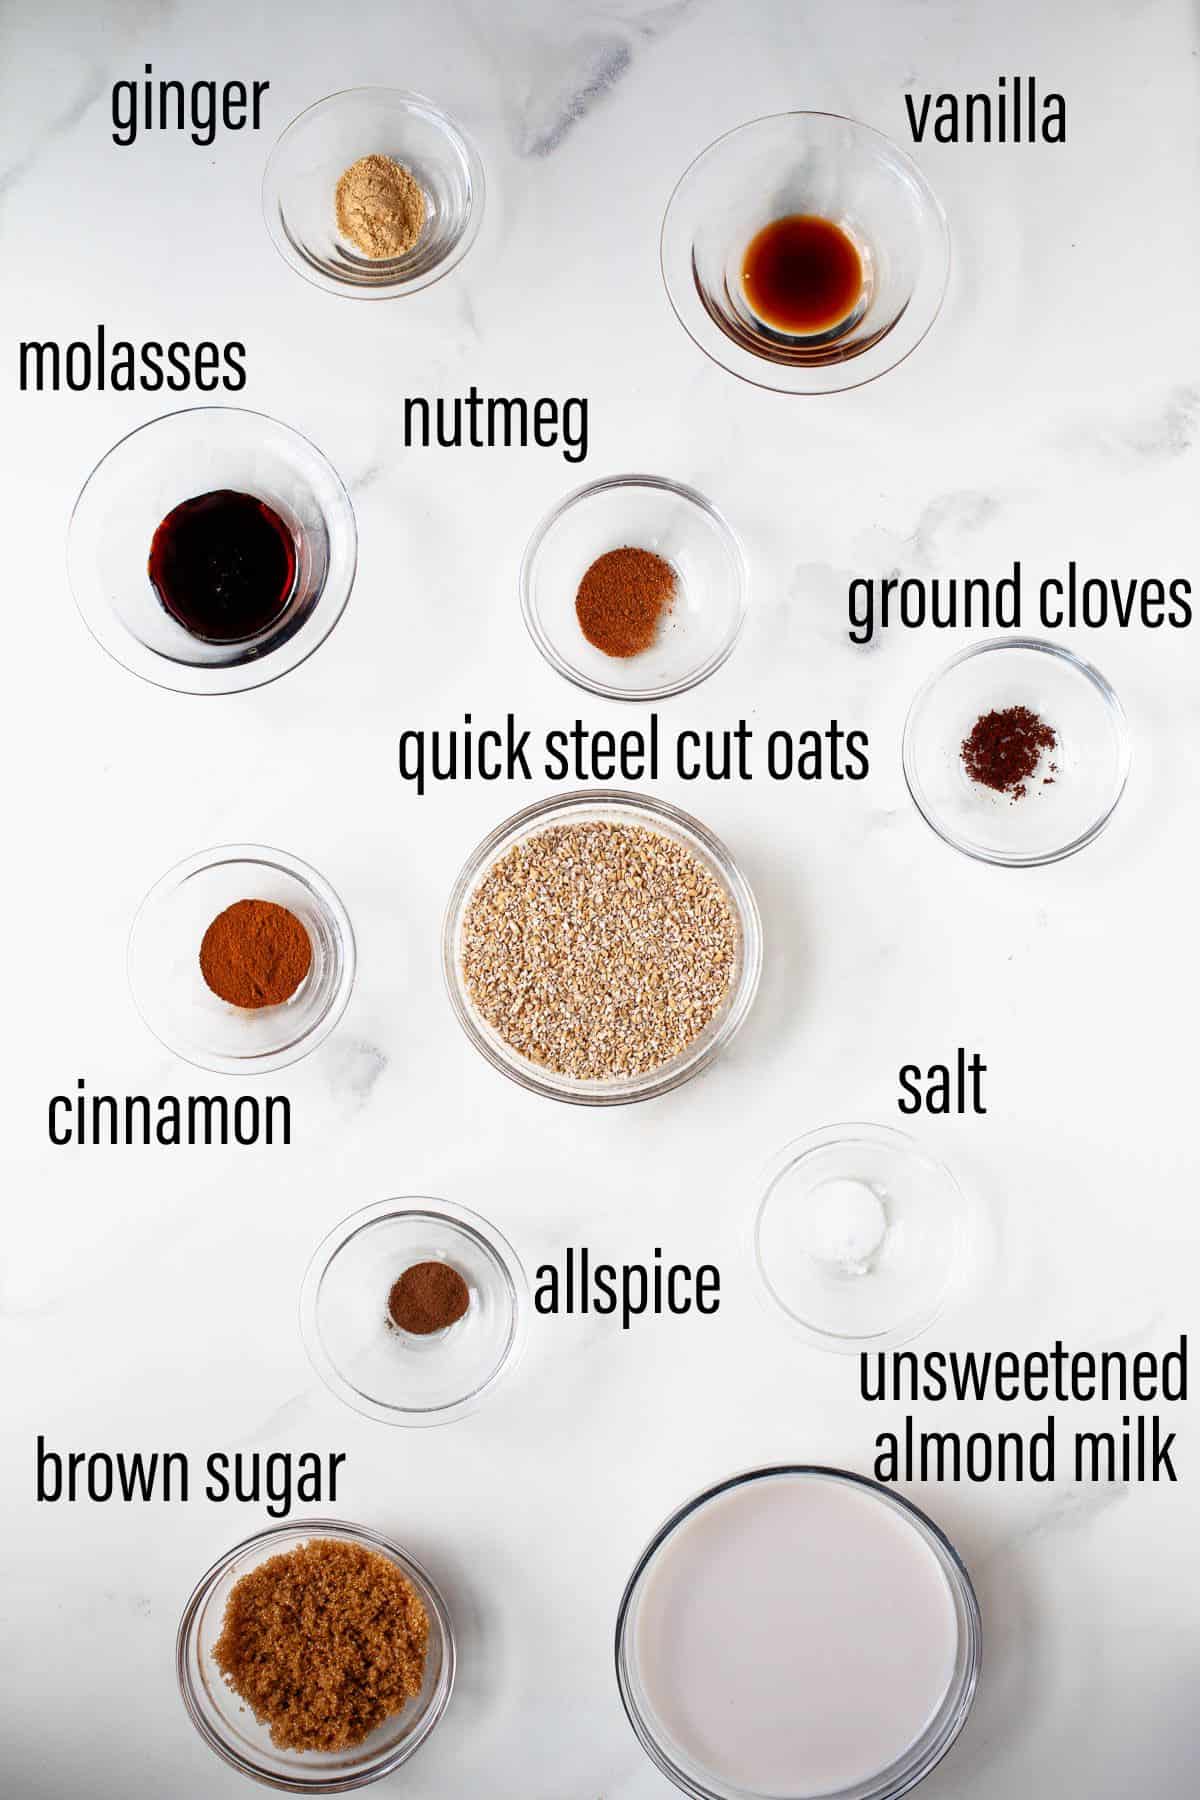 Oatmeal gingerbread ingredients graphic on marble surface with black text overlay